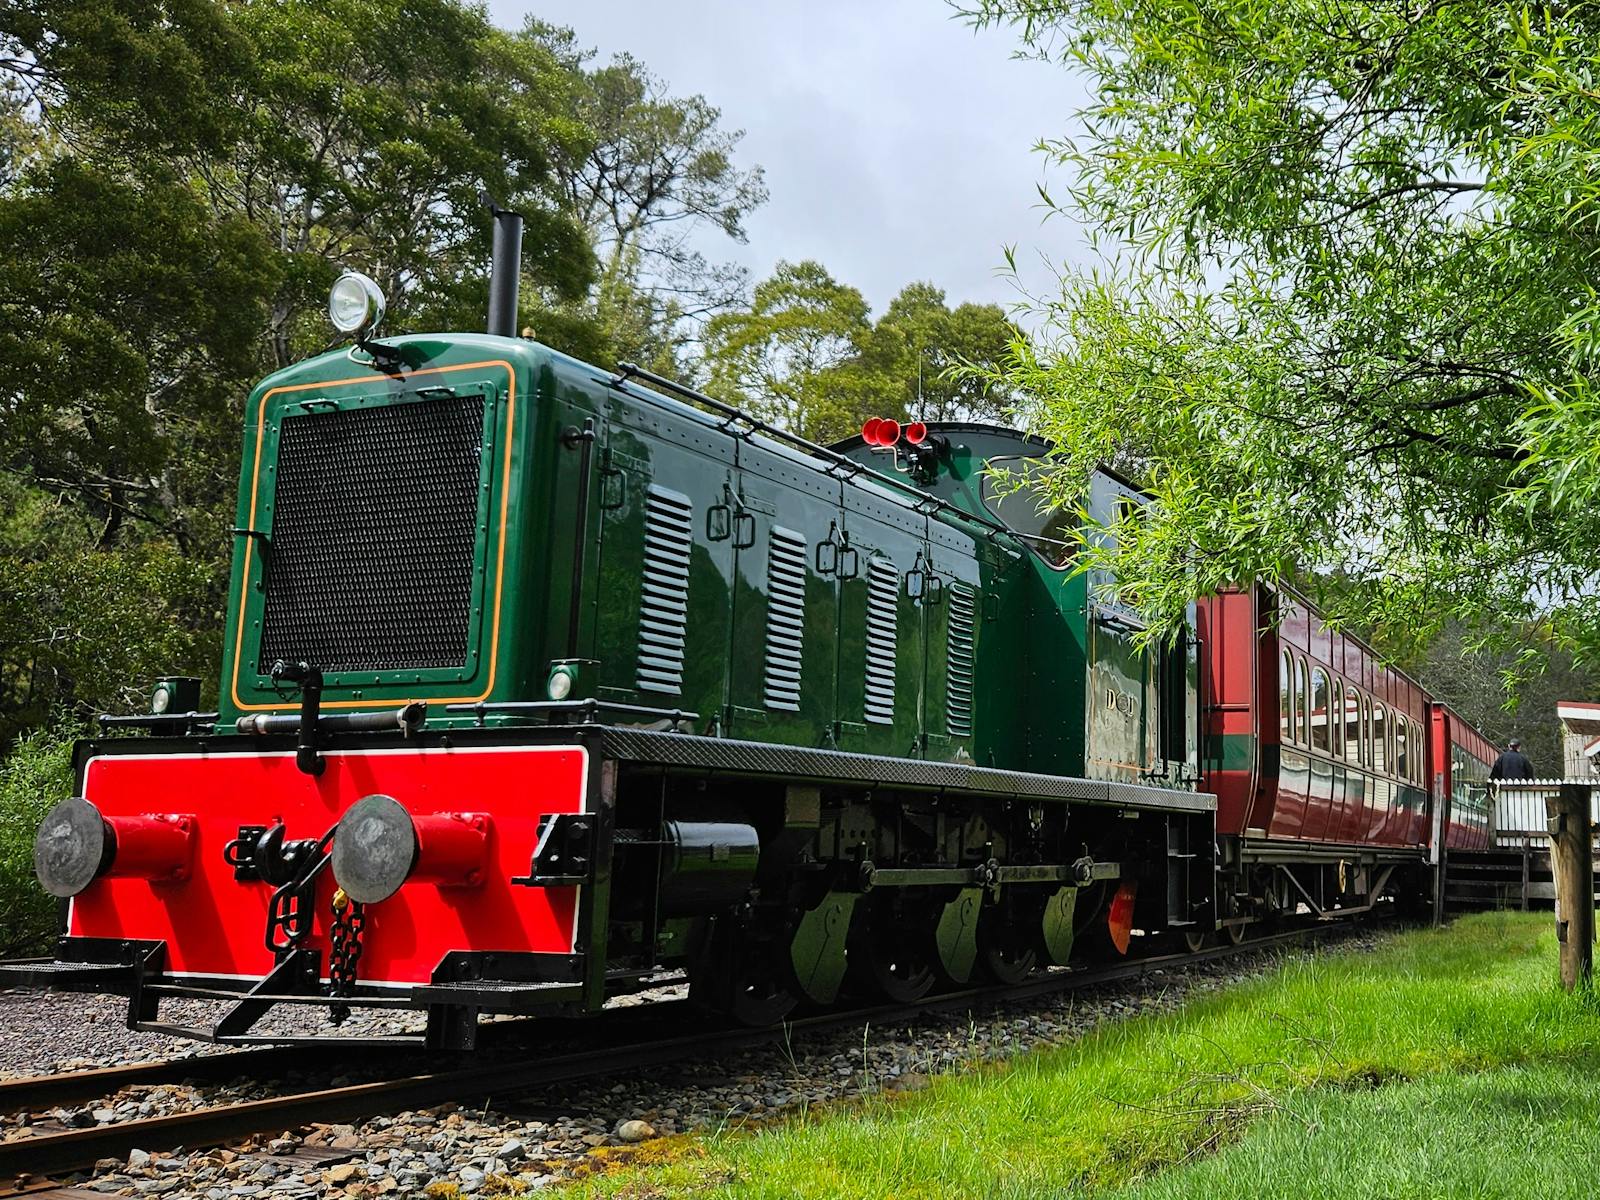 A heritage Drewry diesel locomotive sits at a remote station